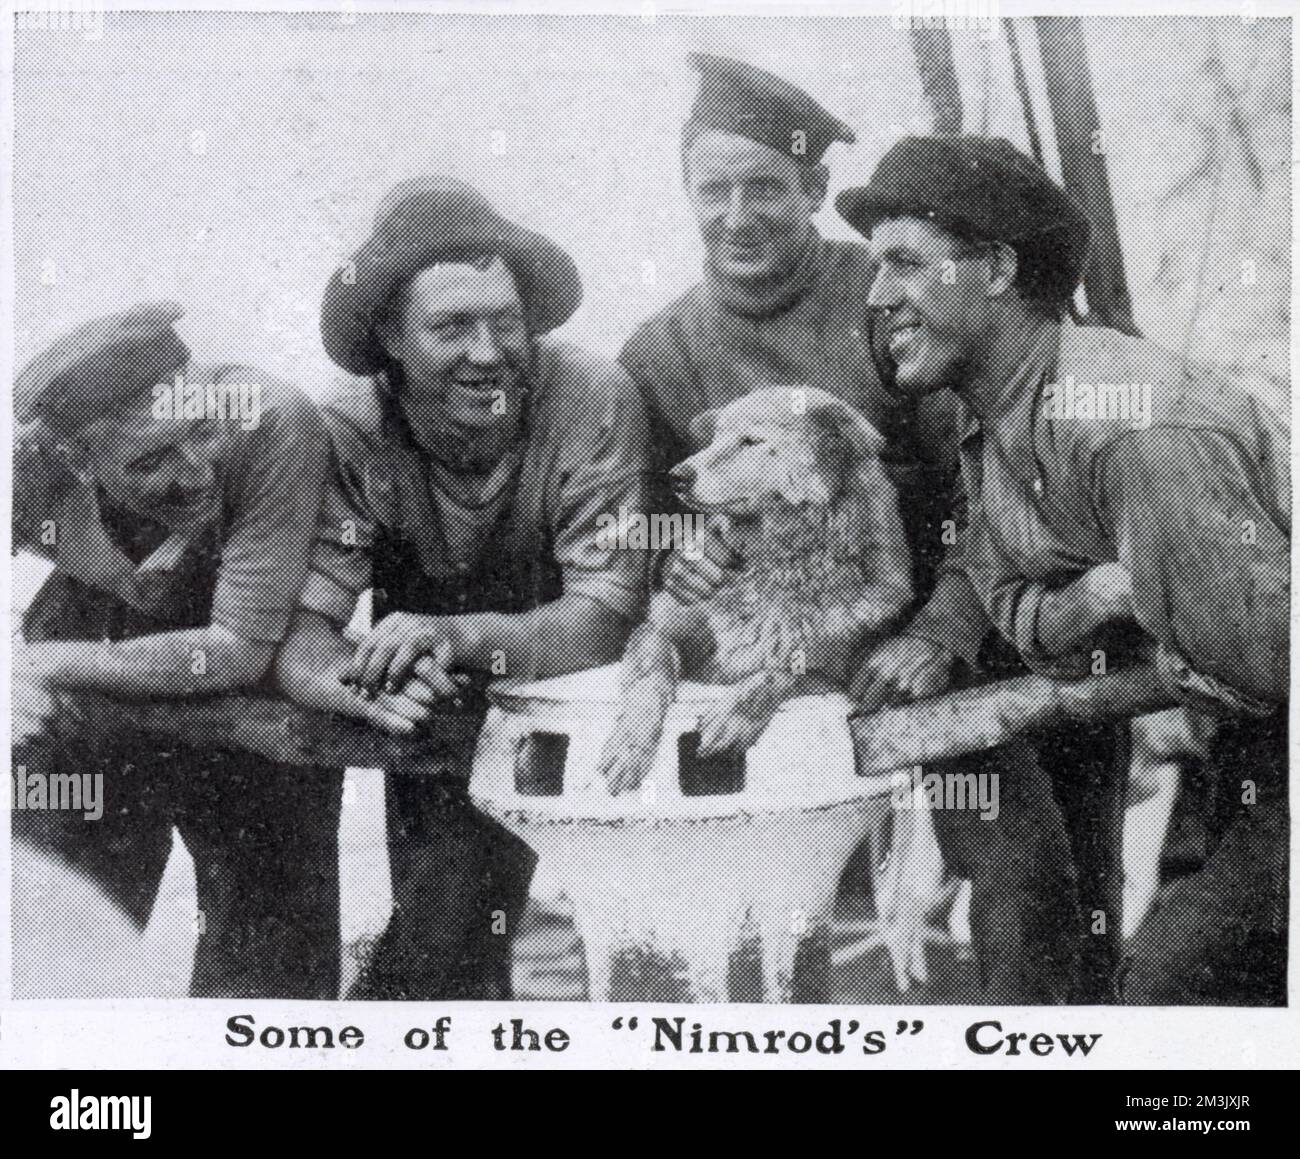 Some of the crew of the 'Nimrod' and one of the husky dogs, on board the ship as it returned from the Nimrod Antarctic Expedition of 1908-09. Stock Photo